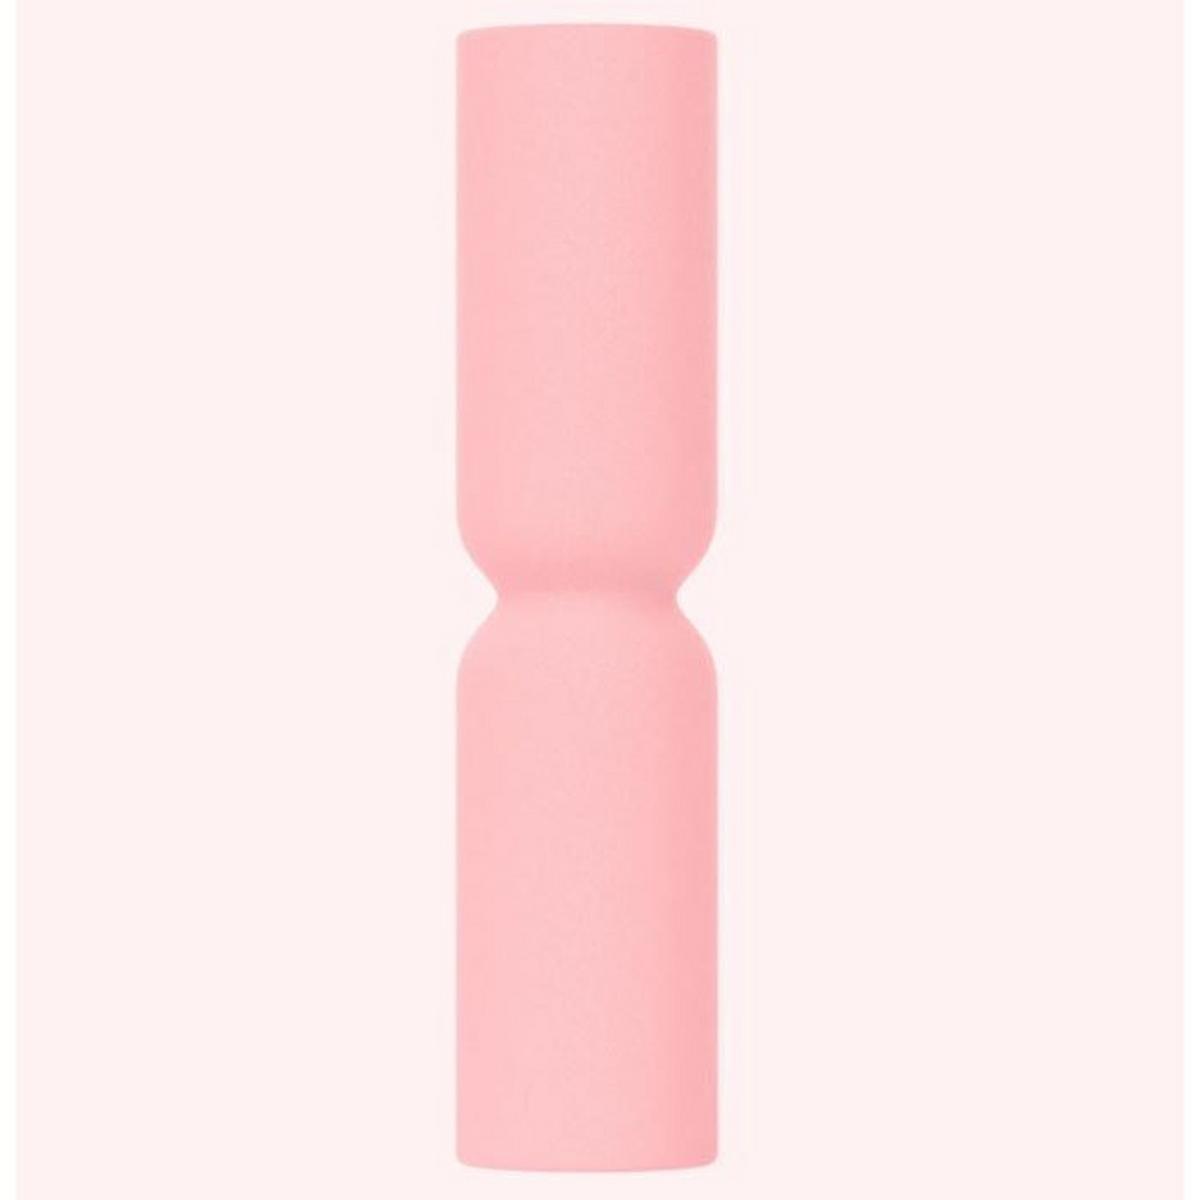 The Hourglass Roller